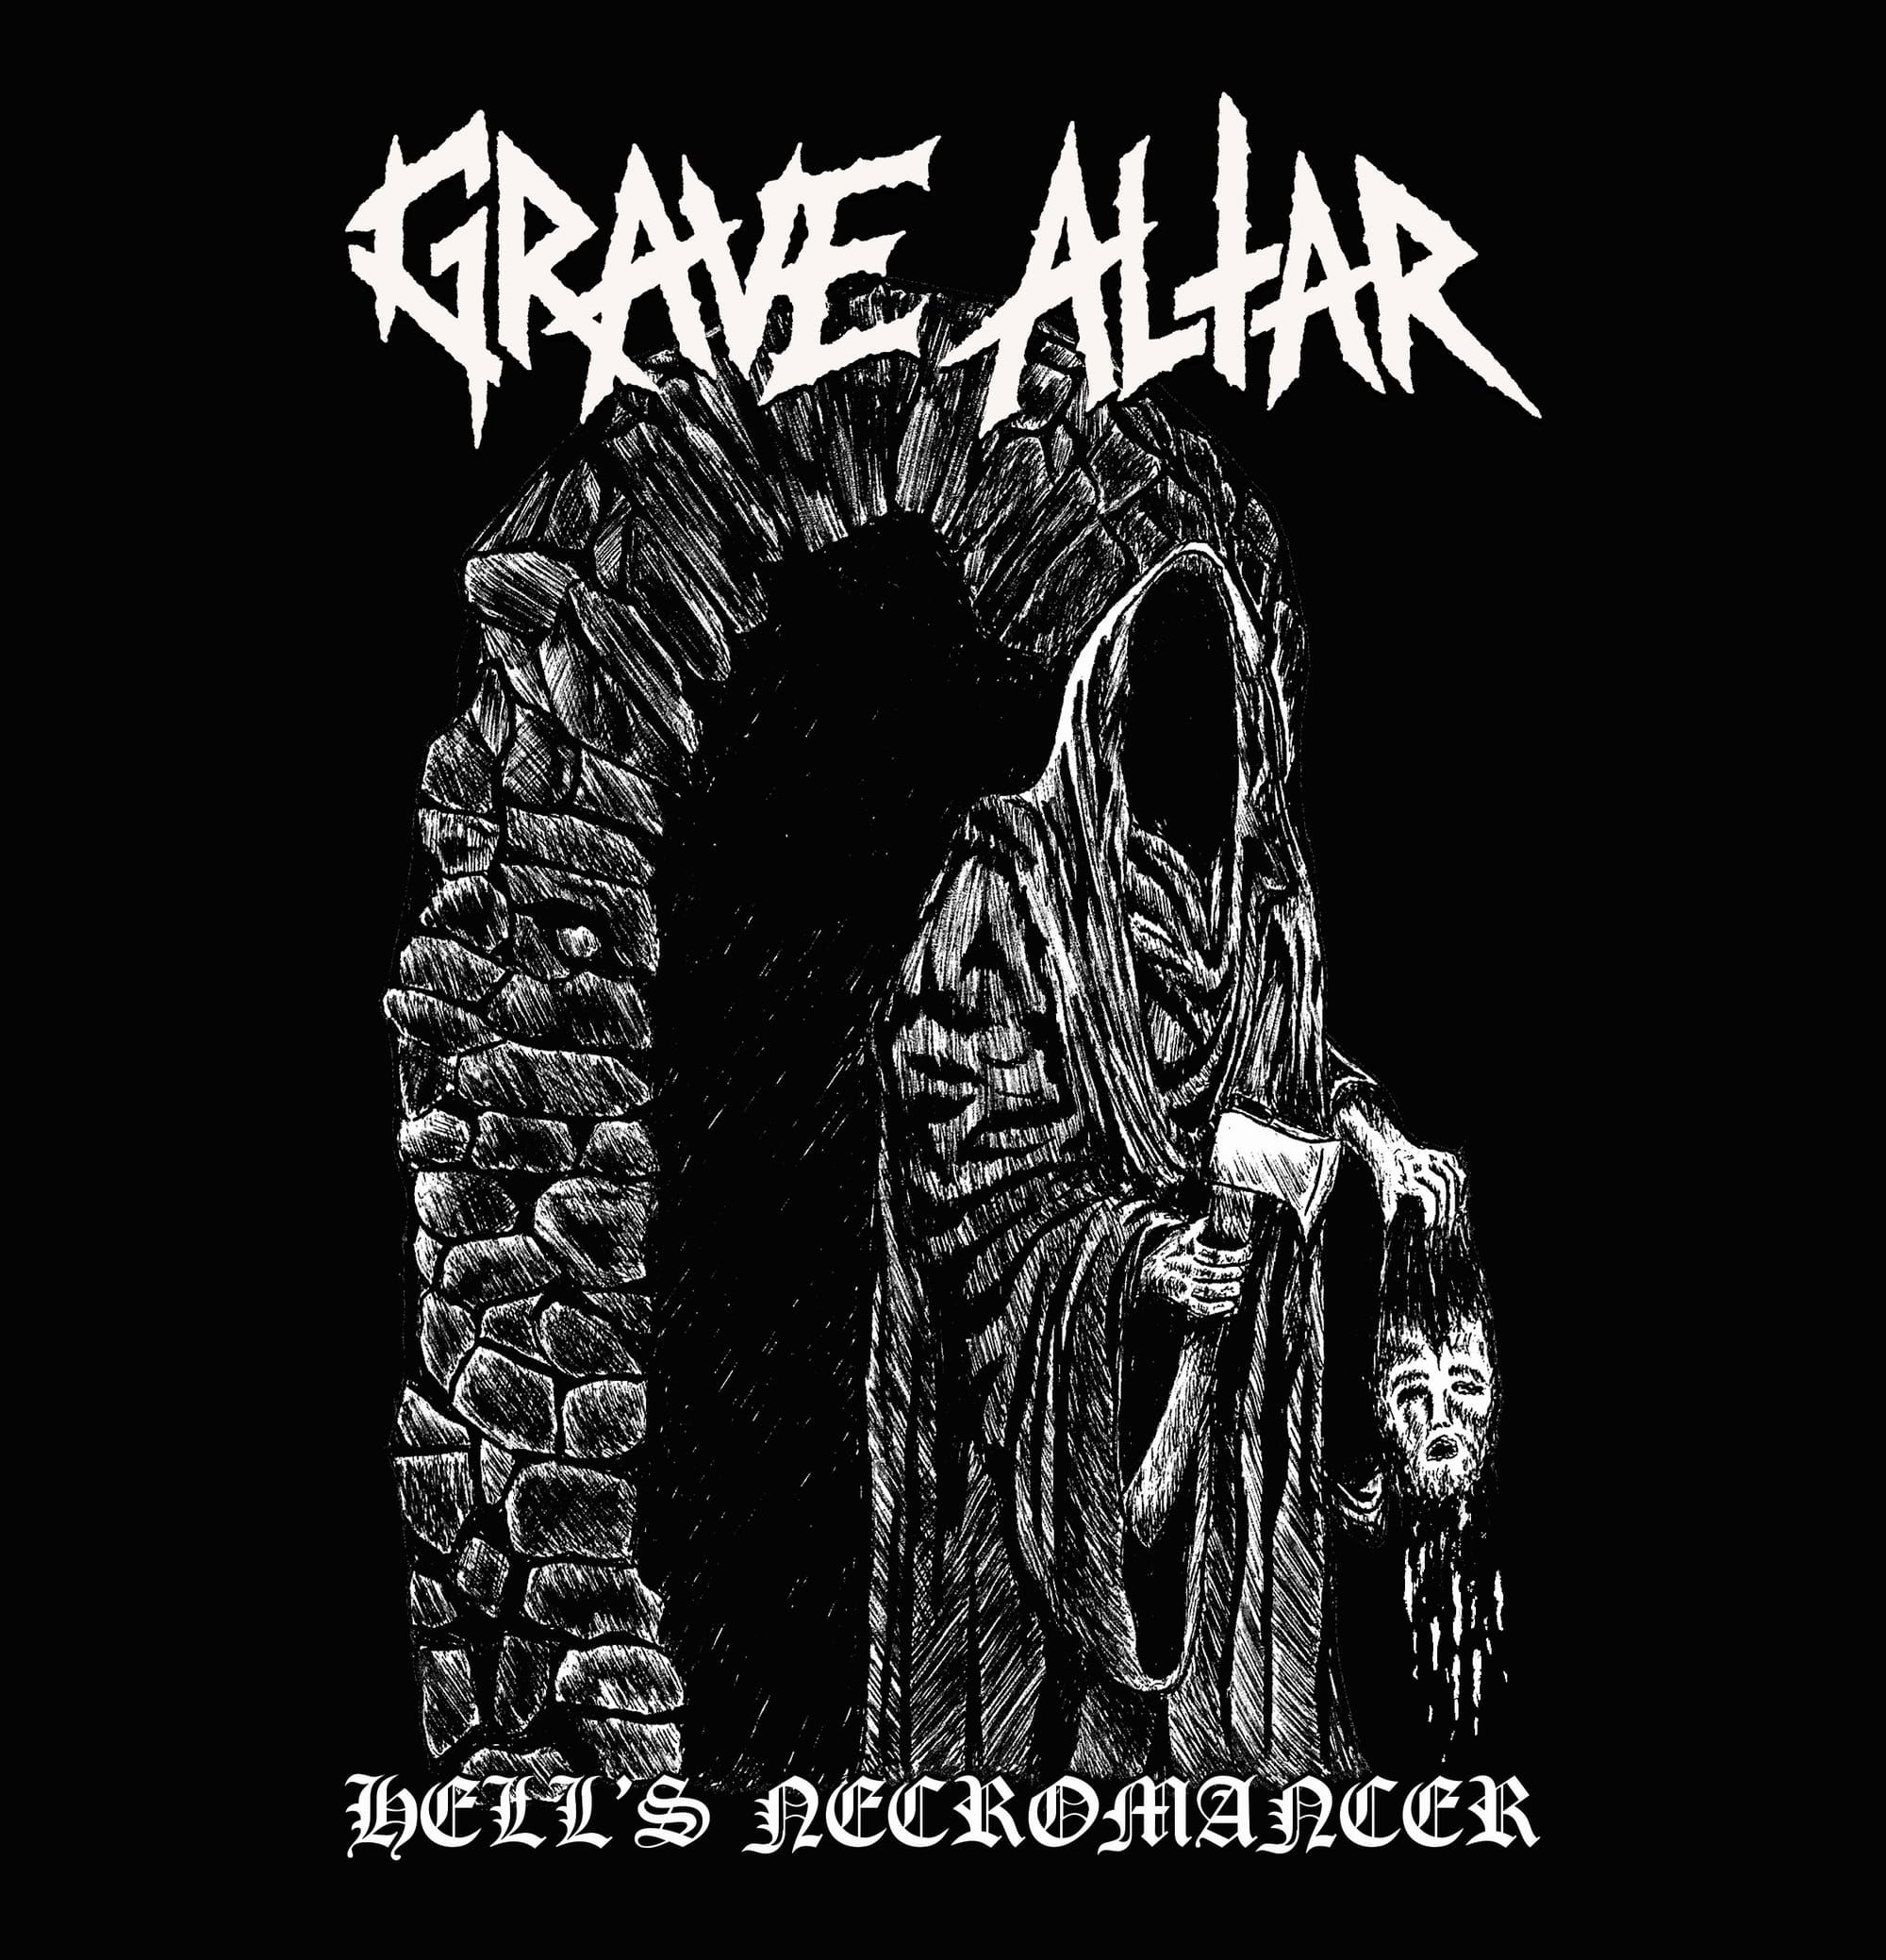 Interview with GRAVE ALTAR